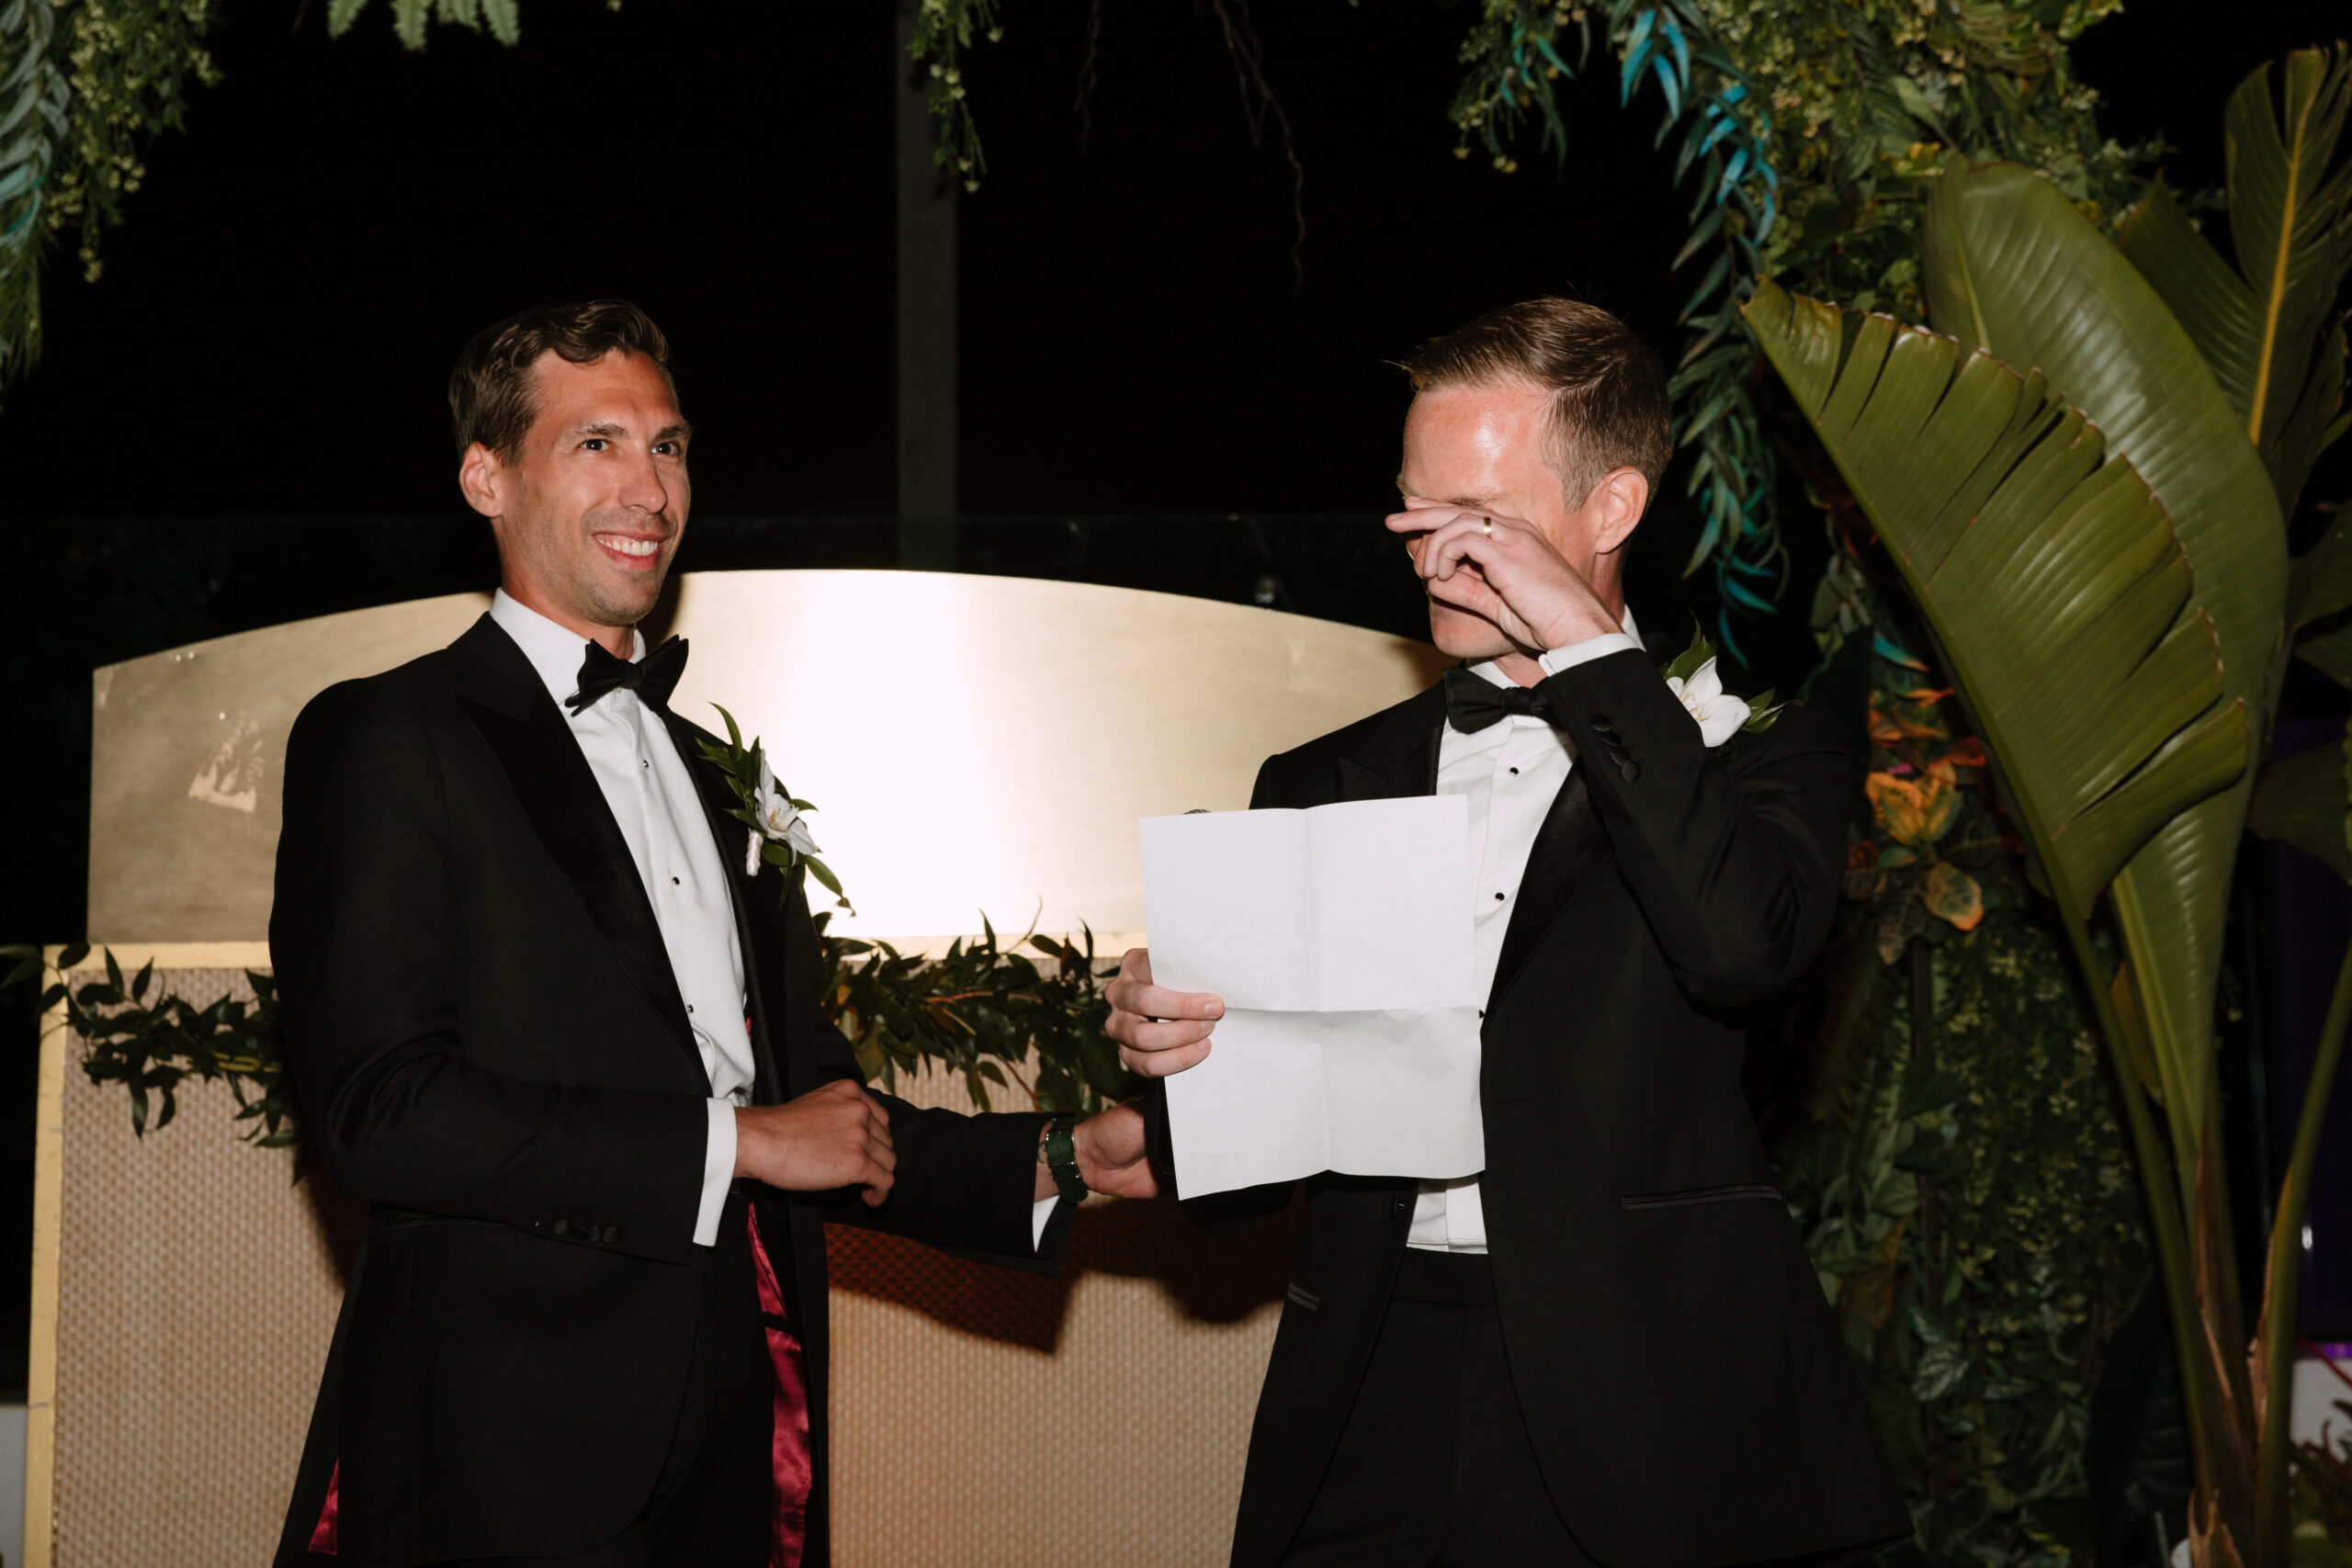 direct flash photo on Kimpton La Peer rooftop of groom crying while reading his wedding vows